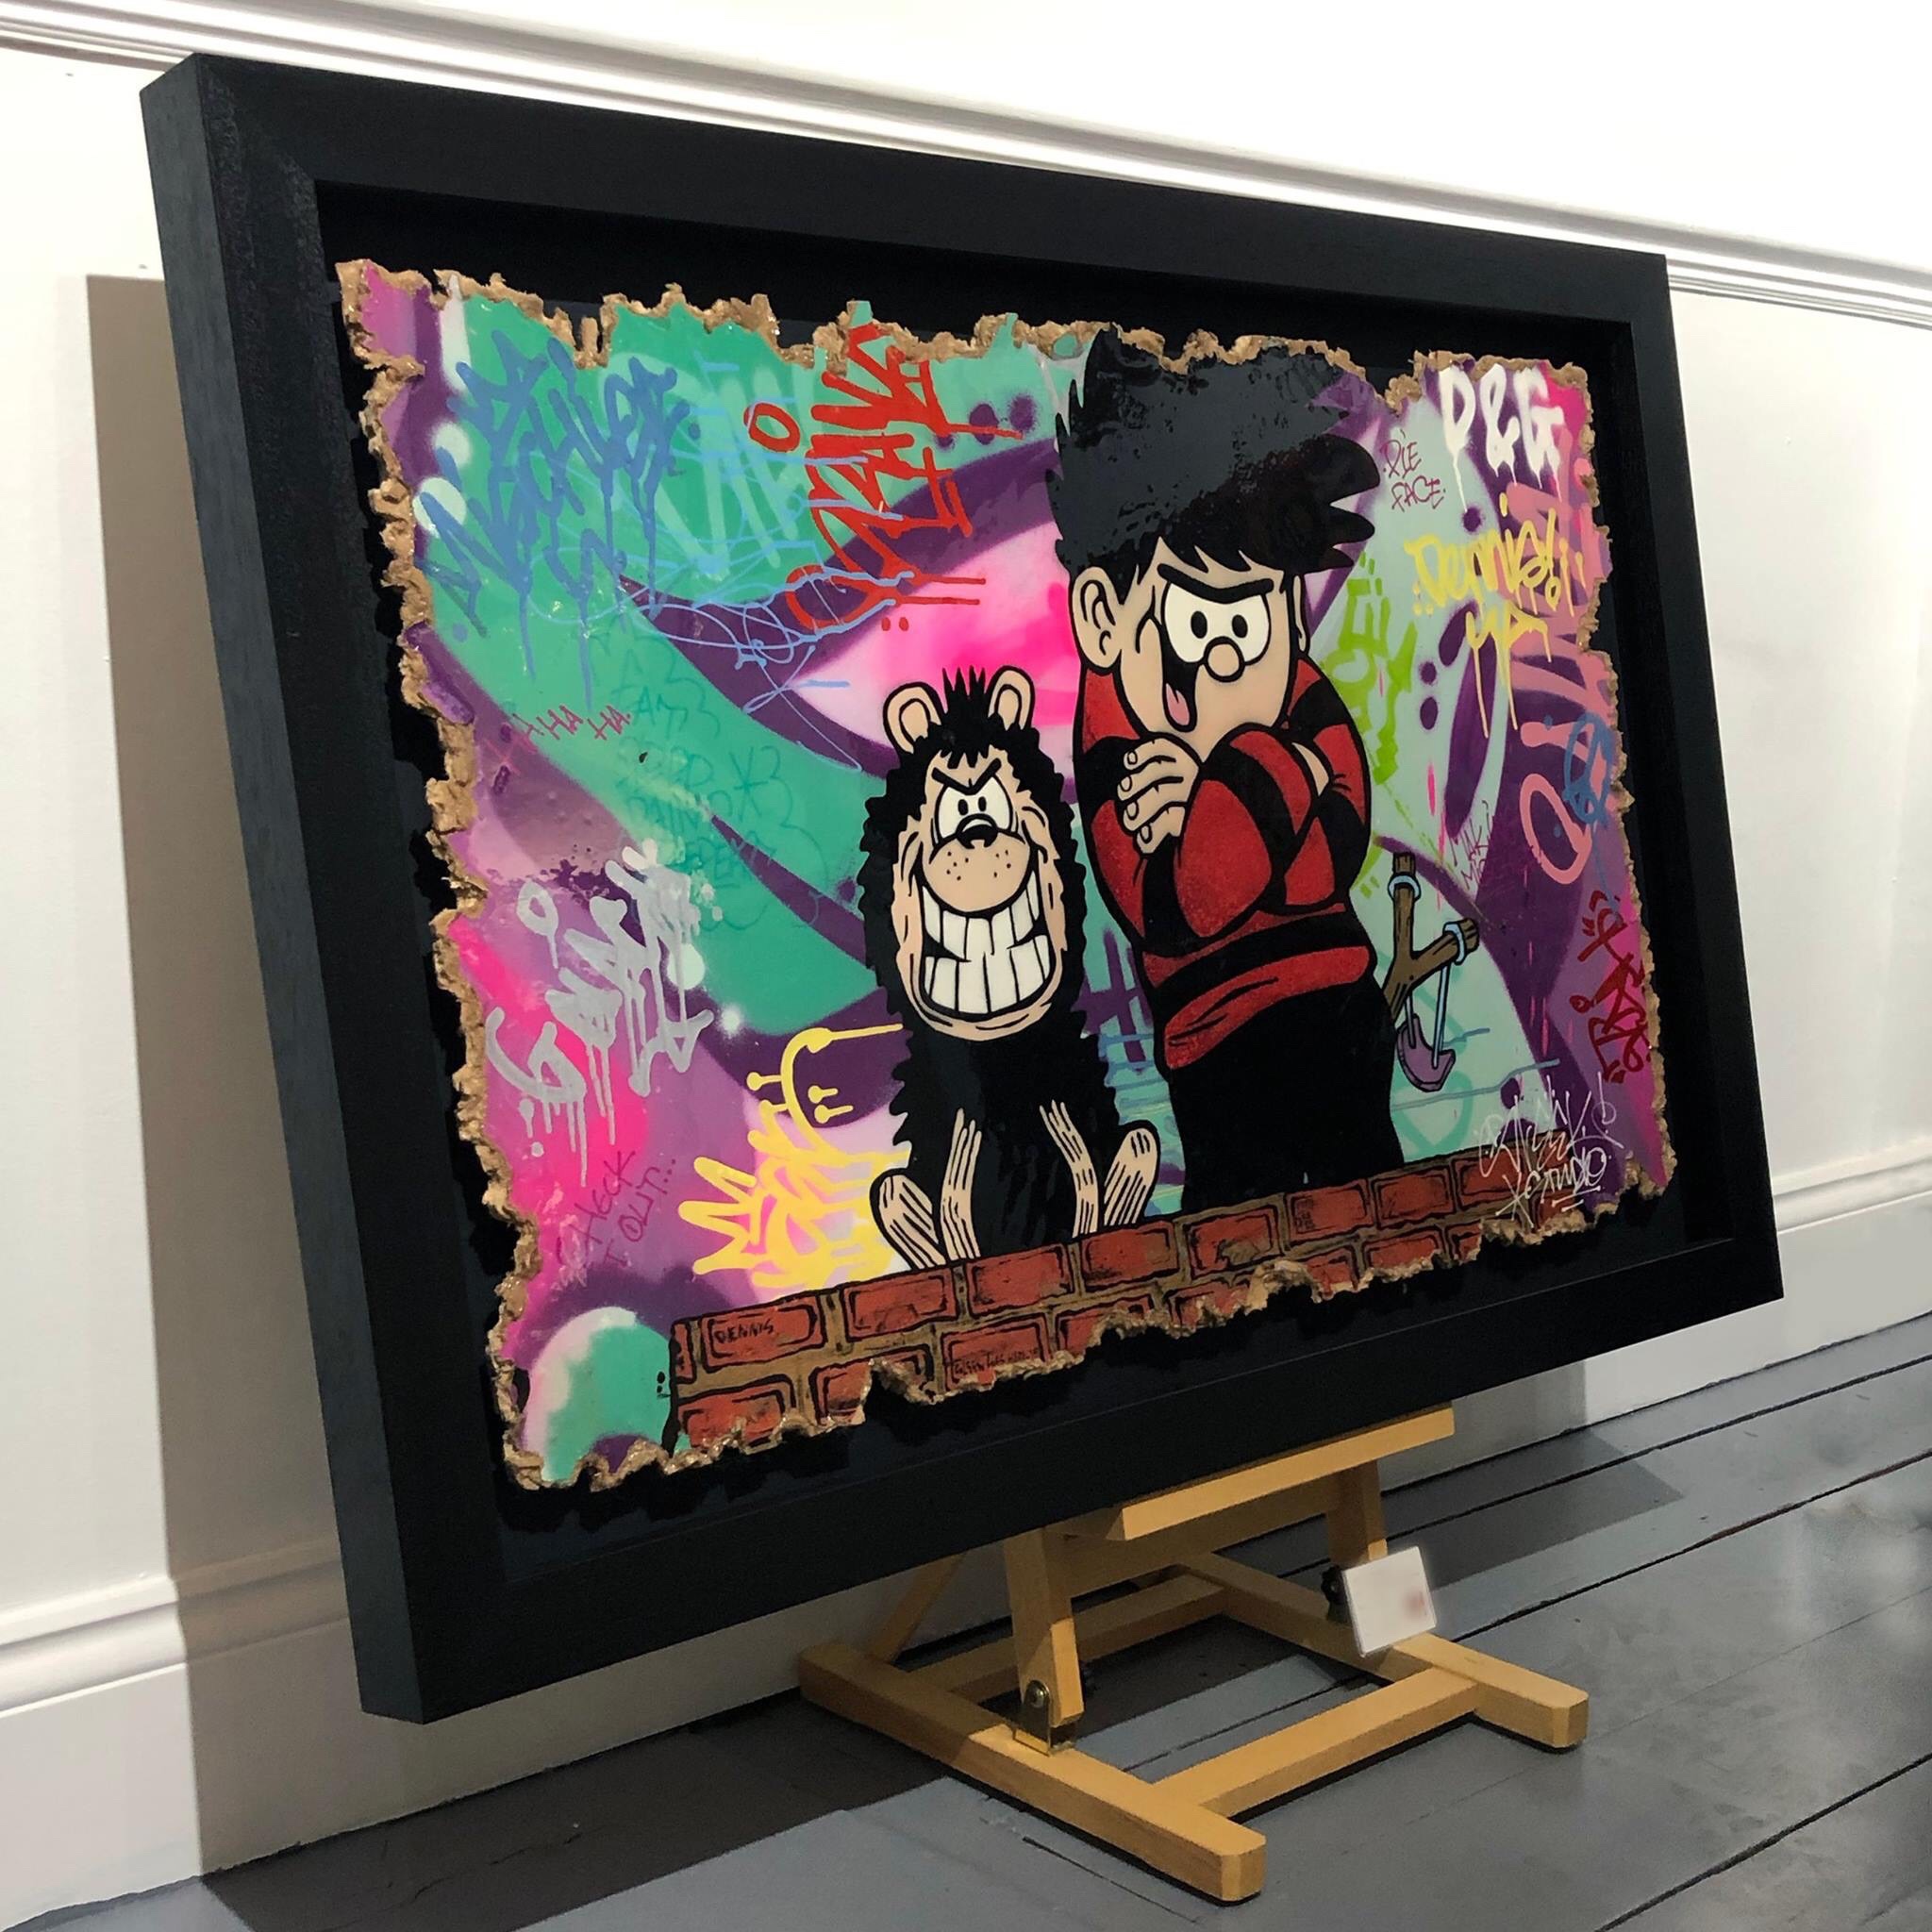 The Beano’s Dennis and Gnasher by Sleek